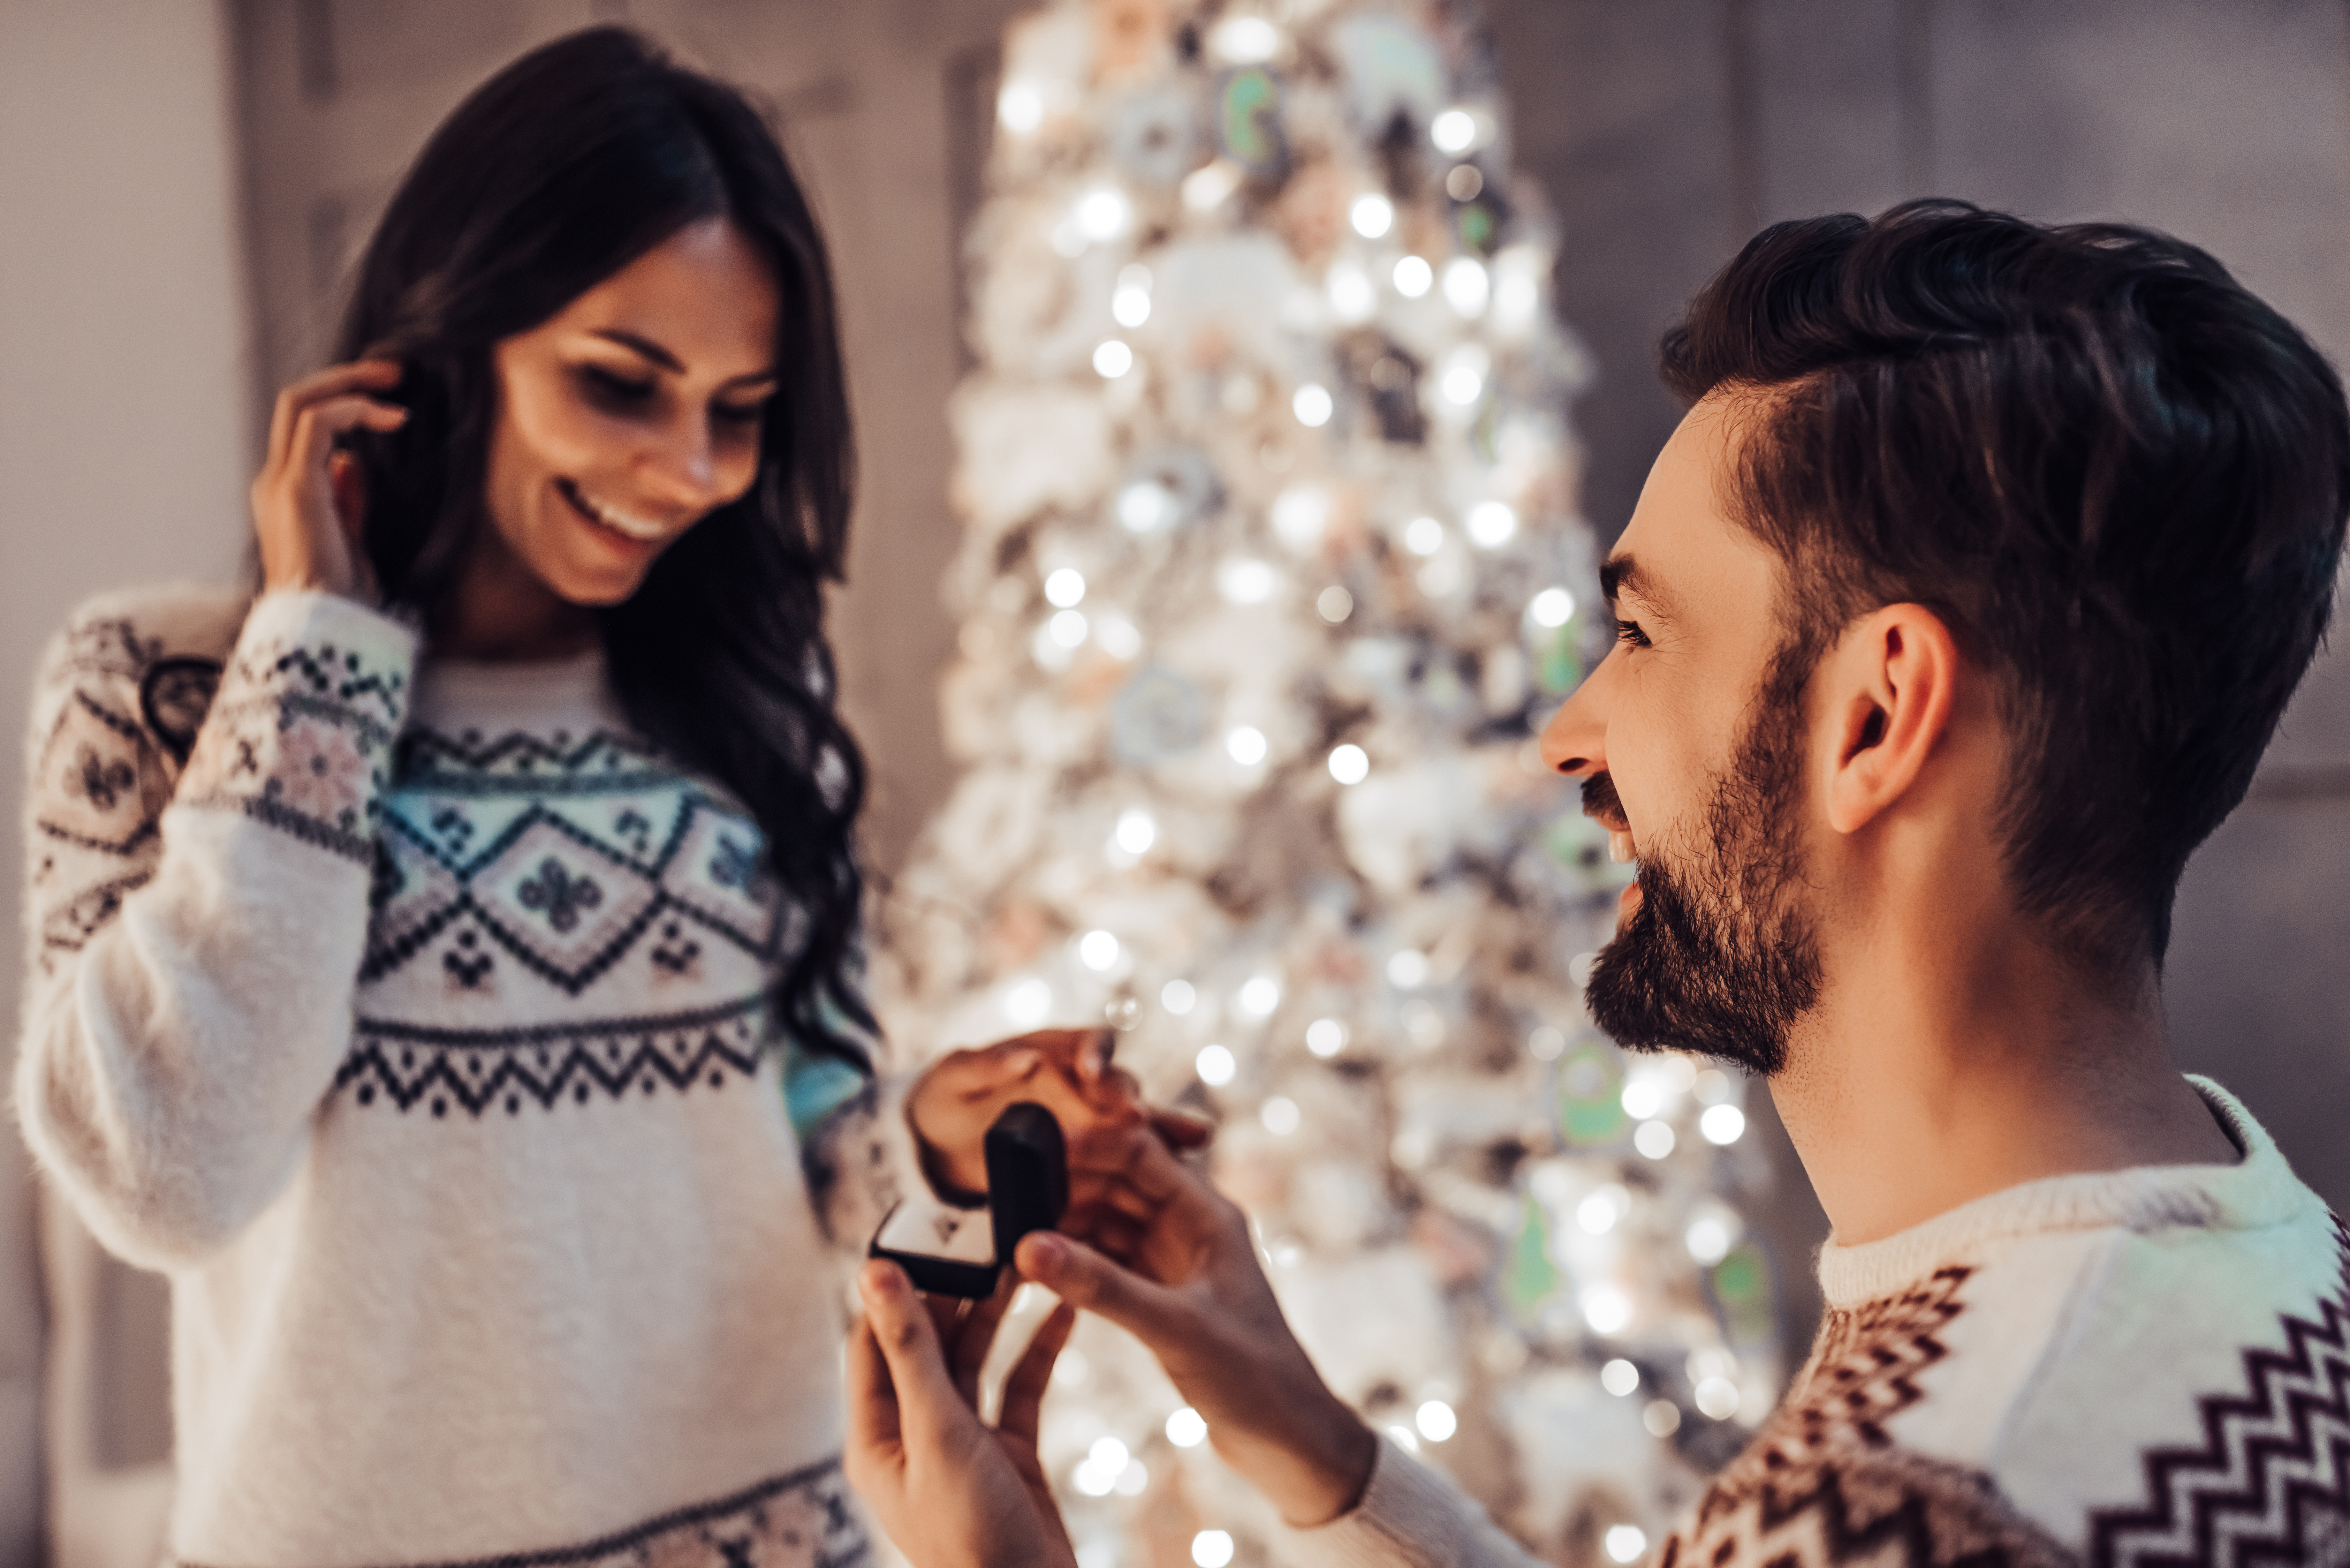 A man proposing to his girlfriend with a Christmas tree in the background | Source: Shutterstock